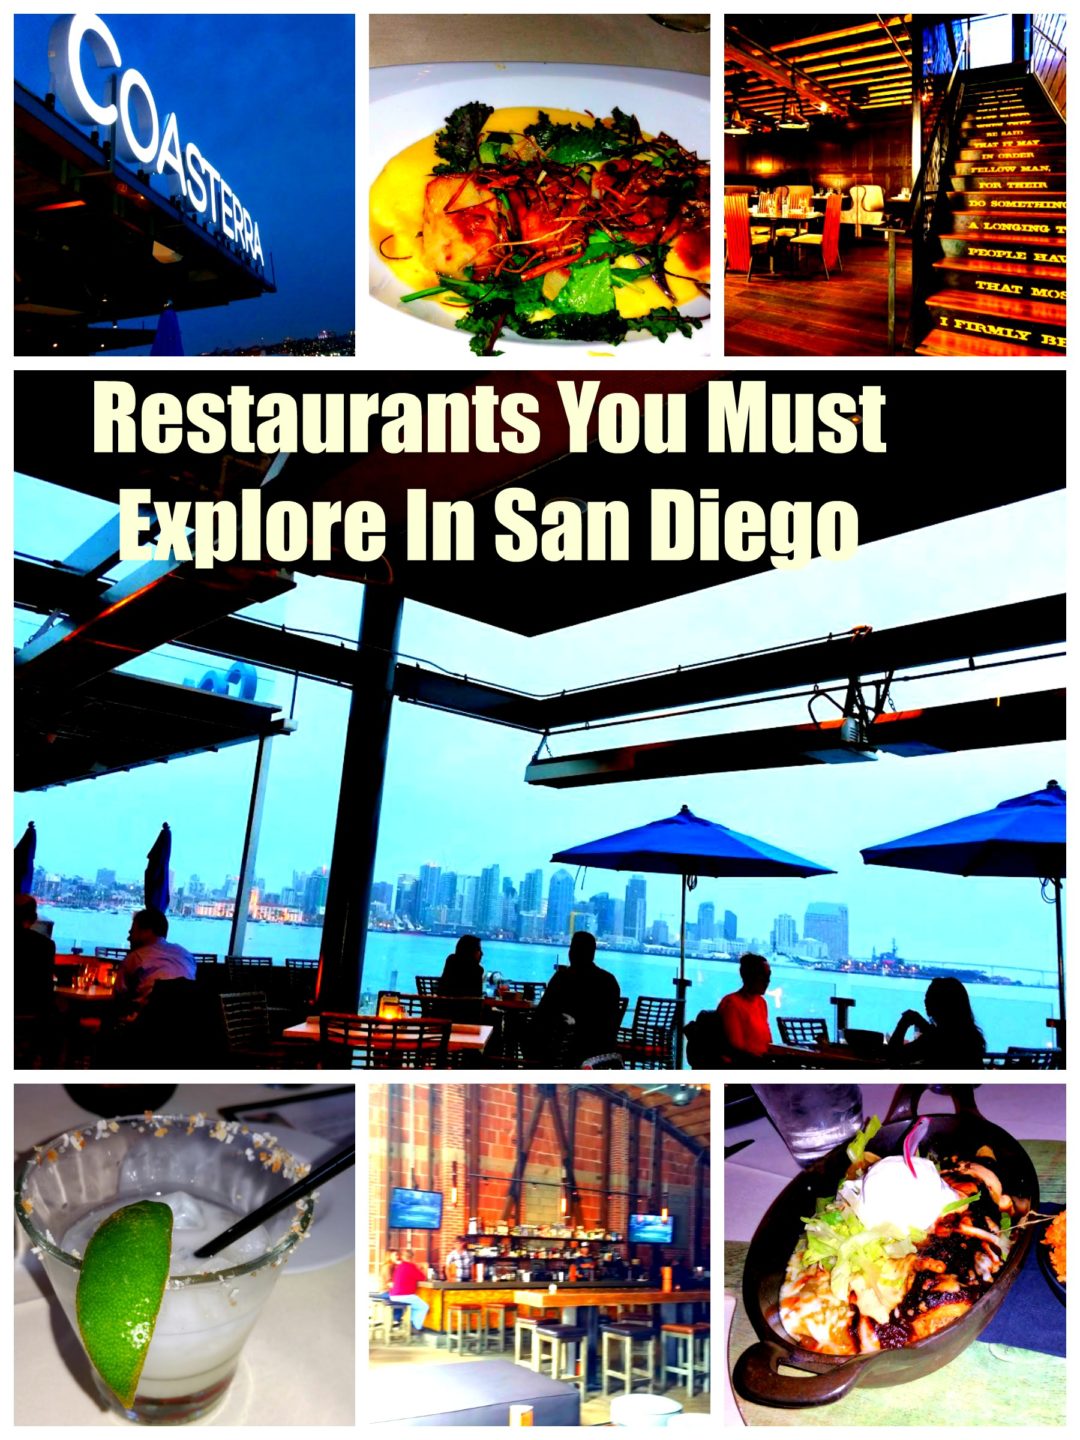 Restaurants You Must Explore In San Diego - Ana's World